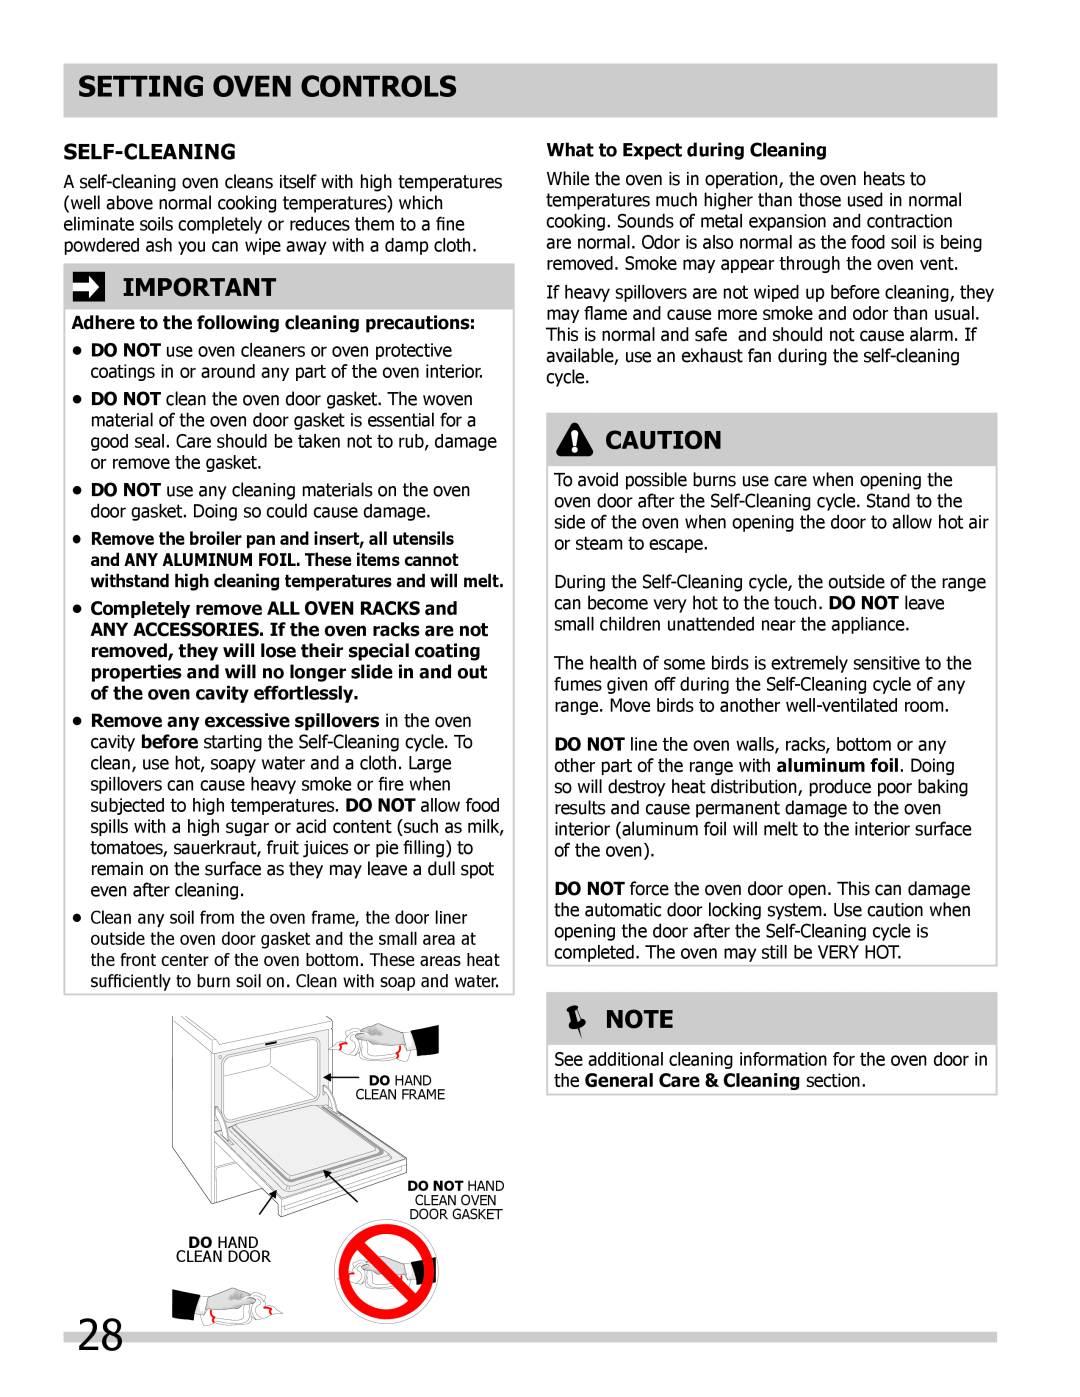 Frigidaire 318205854 Self-cleaning, Adhere to the following cleaning precautions, What to Expect during Cleaning,  Note 